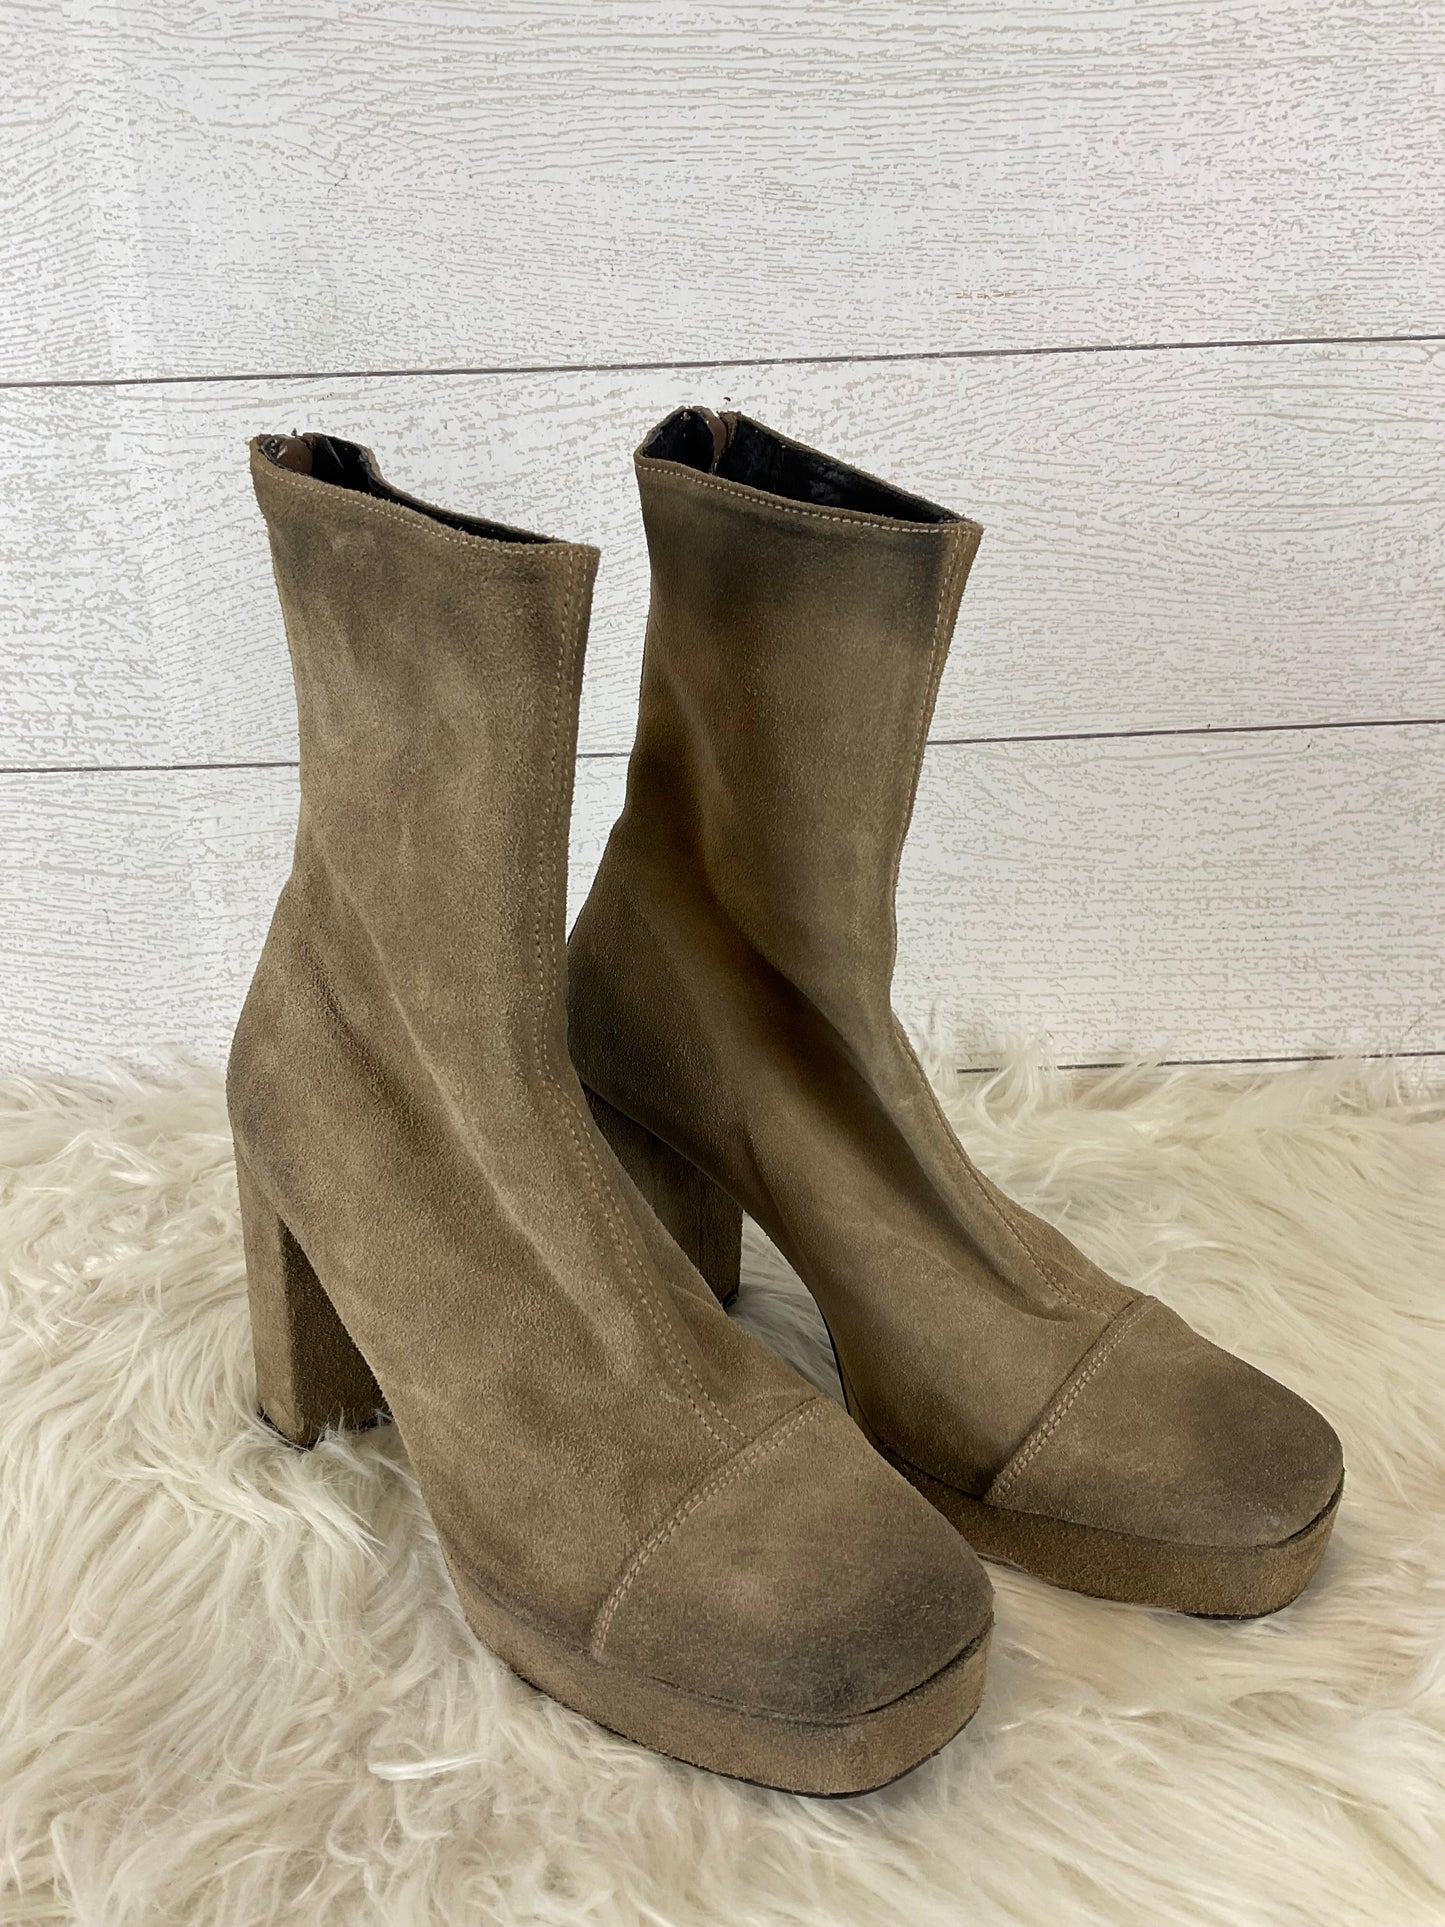 Boots Ankle Heels By Free People  Size: 7